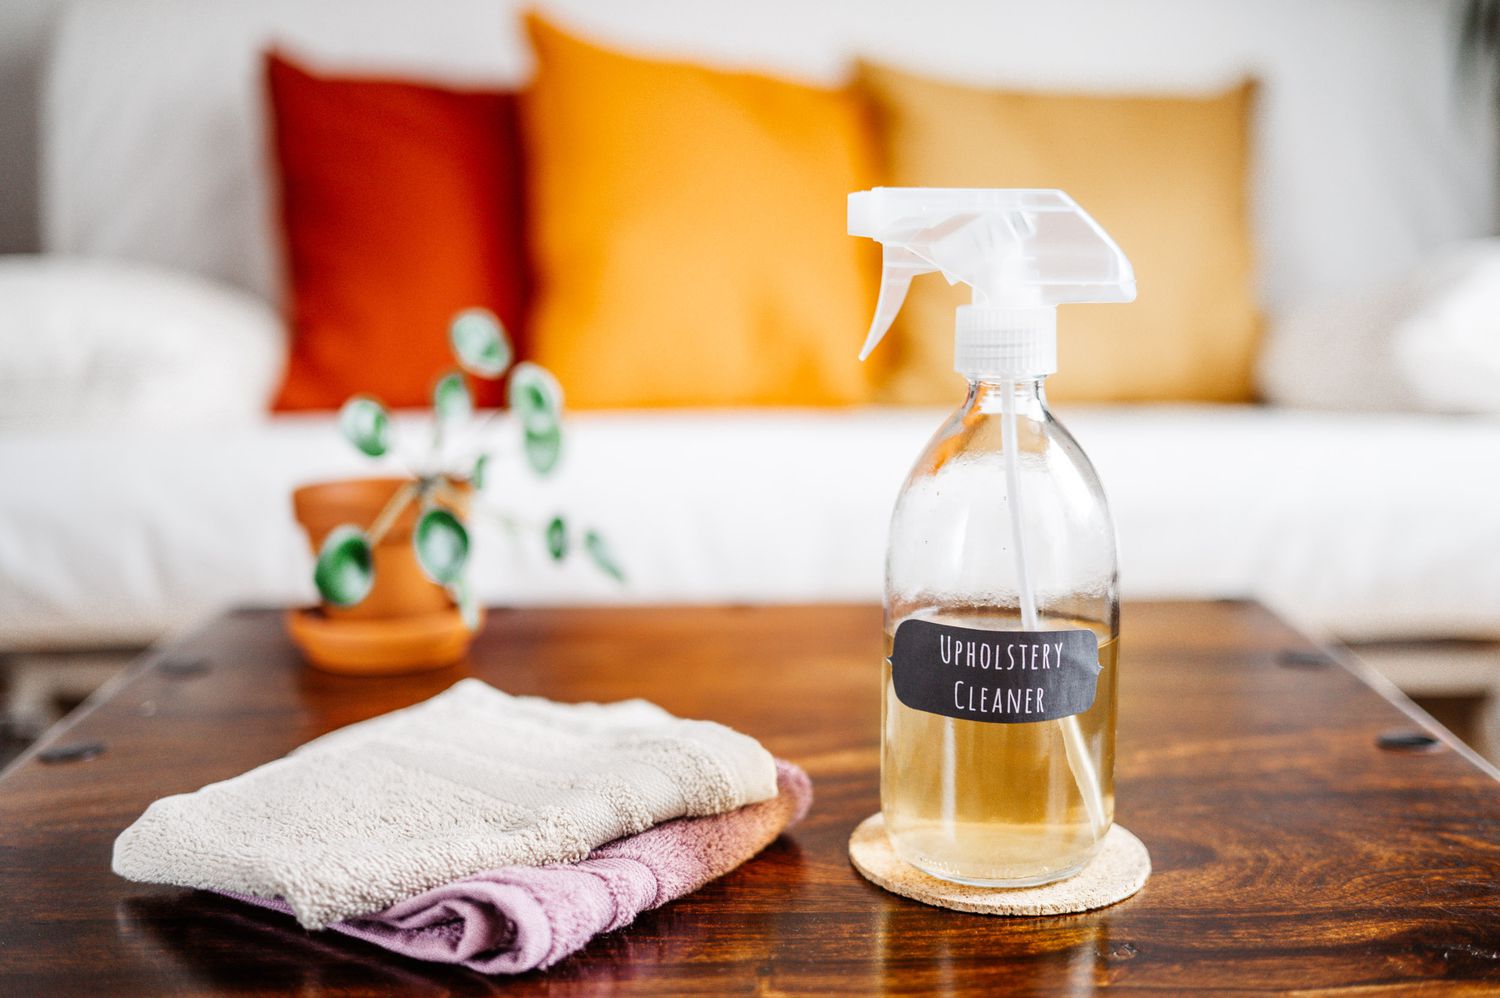 Homemade upholstery cleaner in clear spray bottle next to folded towels